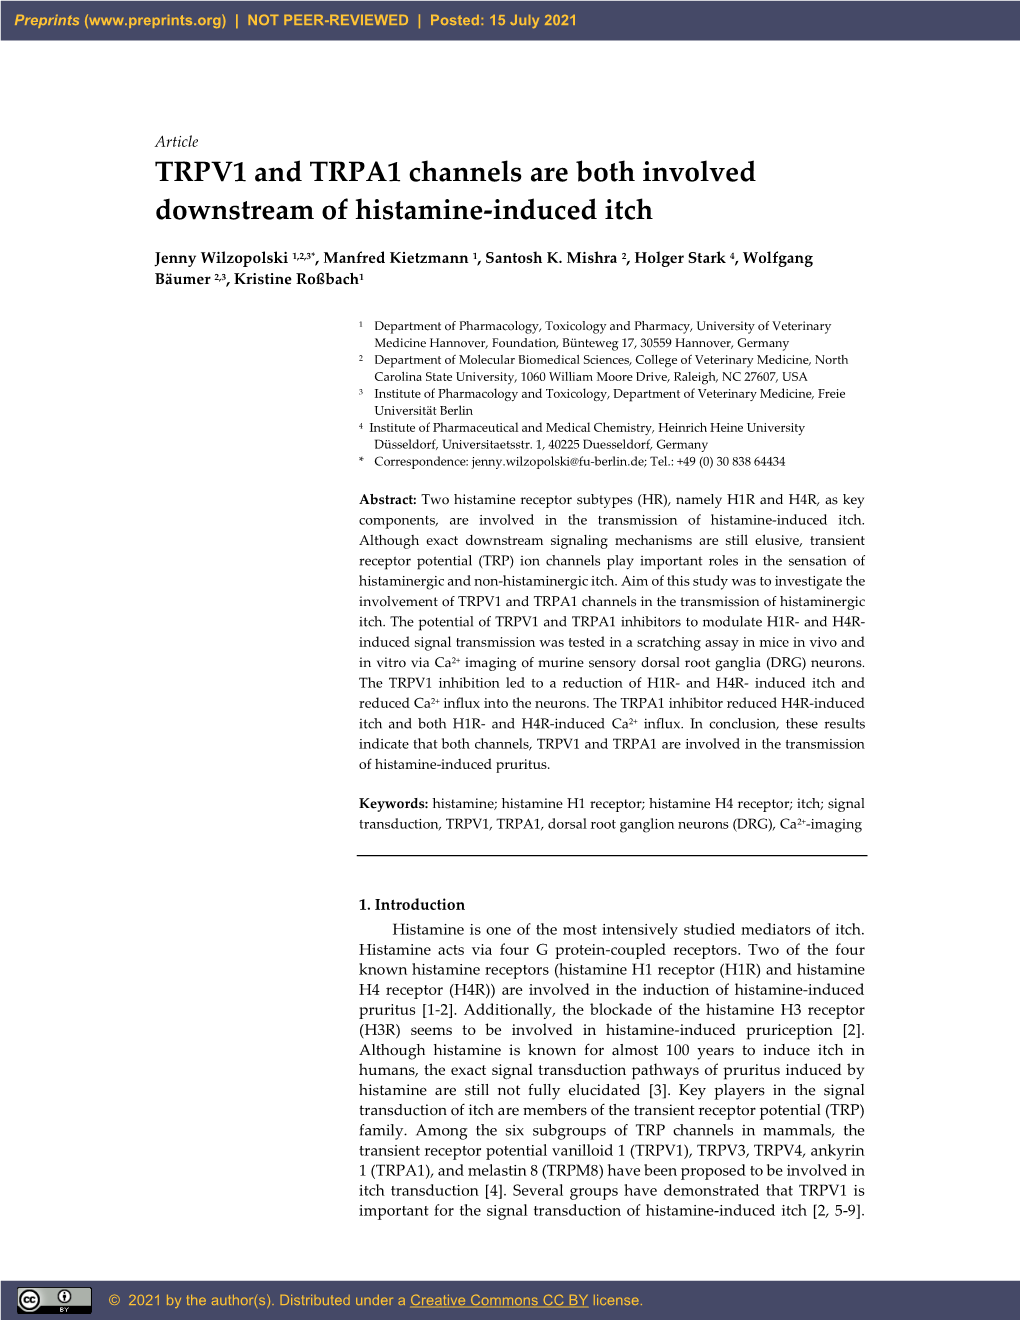 TRPV1 and TRPA1 Channels Are Both Involved Downstream of Histamine-Induced Itch